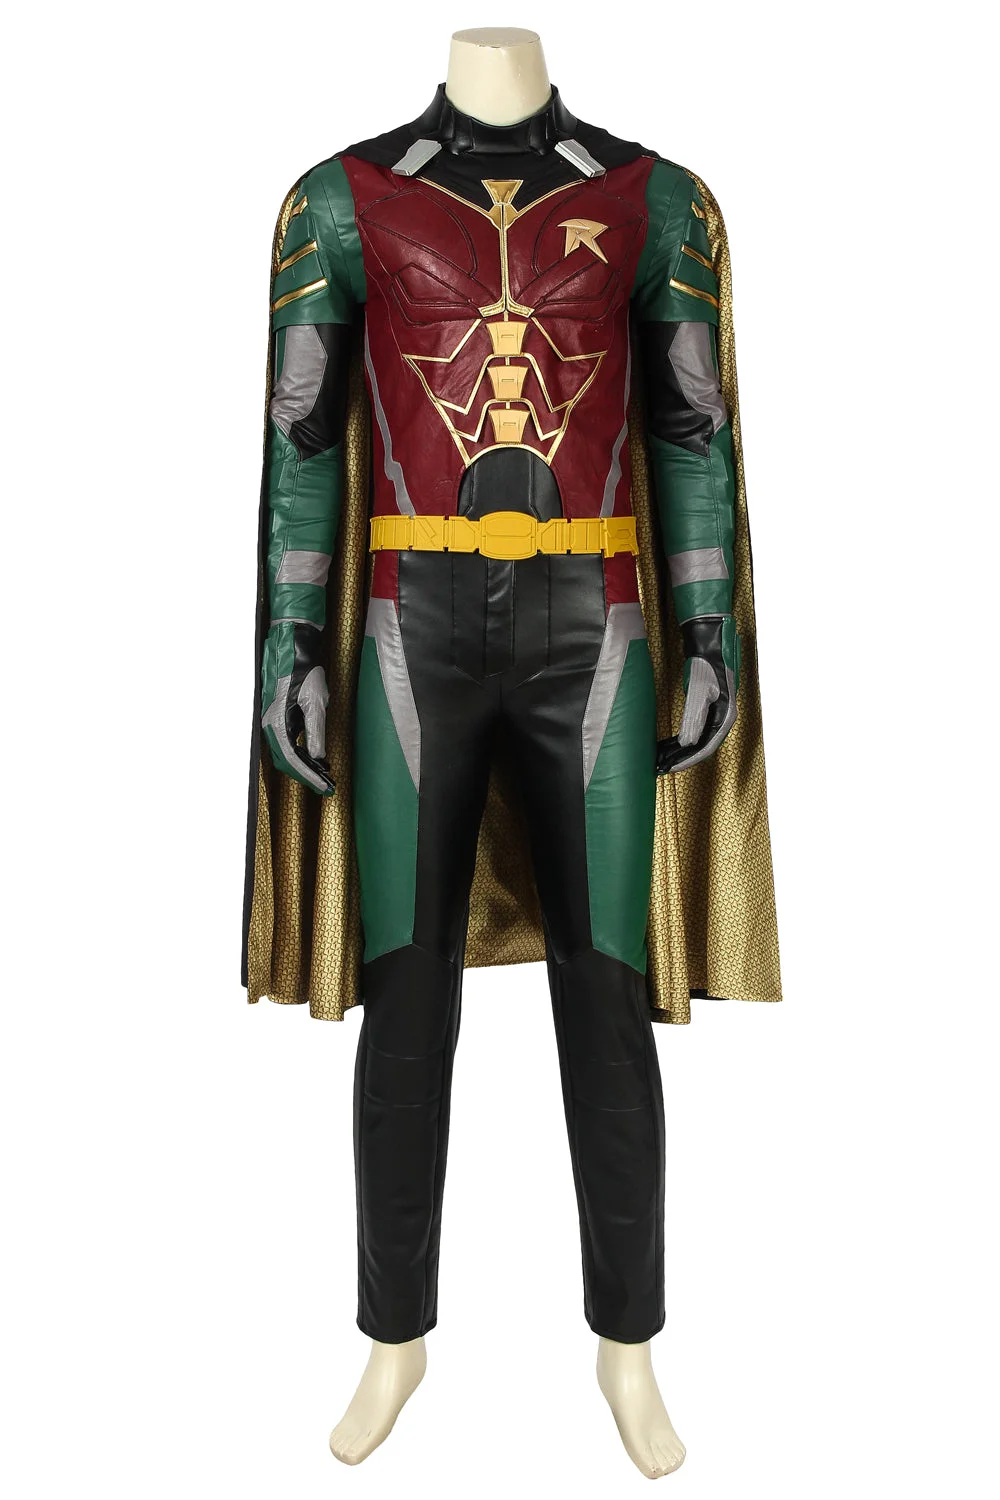 Titans Robin Cosplay Costume Dick Grayson Suit